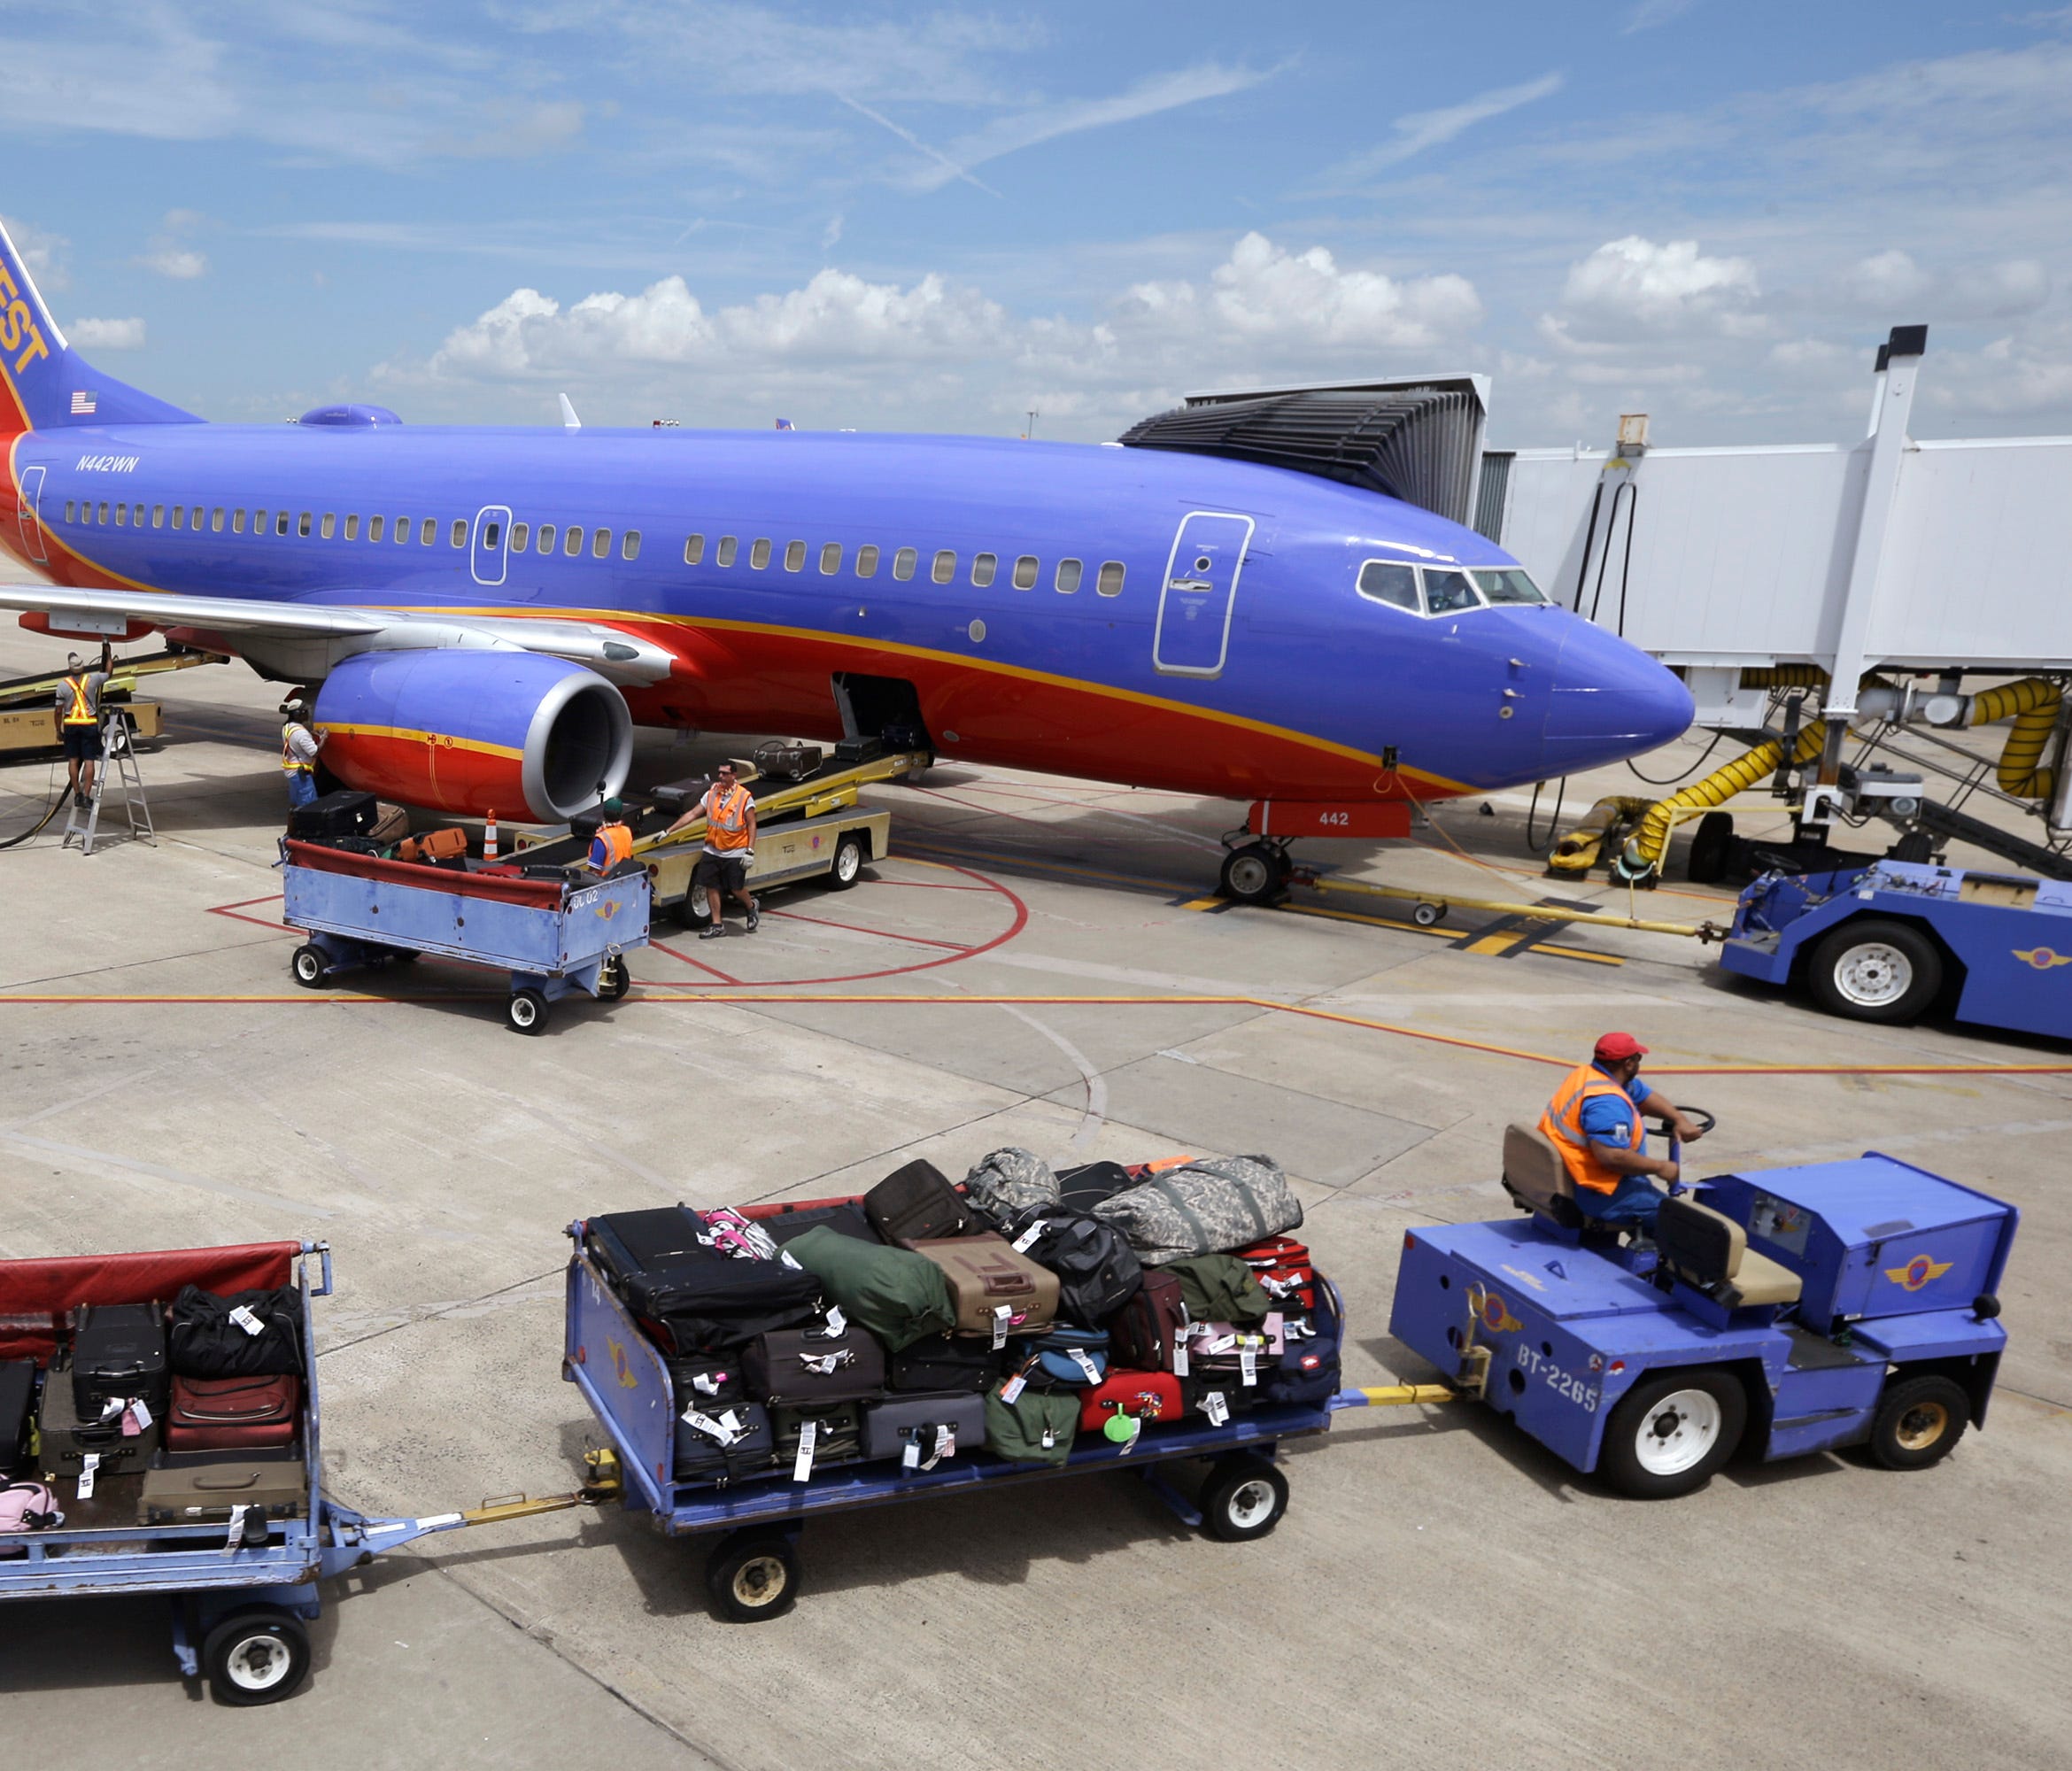 In this file photo from June 19, 2014, baggage carts are towed to a Southwest Airlines jet at Bill and Hillary Clinton National Airport in Little Rock, Ark.